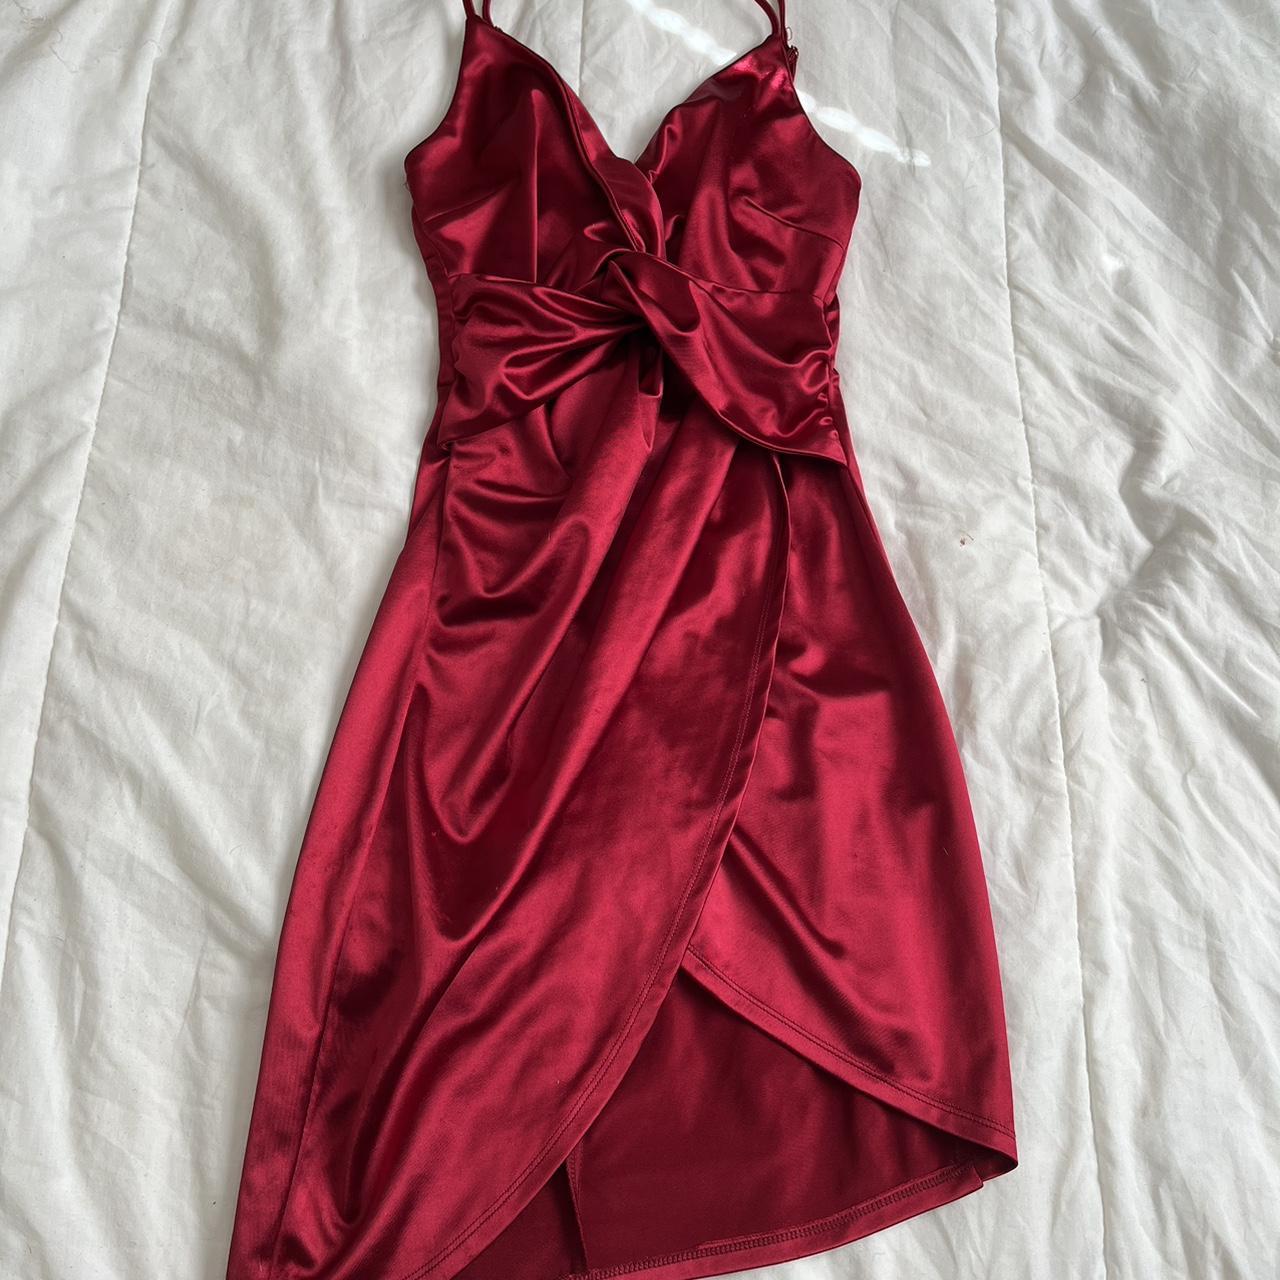 Satin red dress - in great condition - size small... - Depop